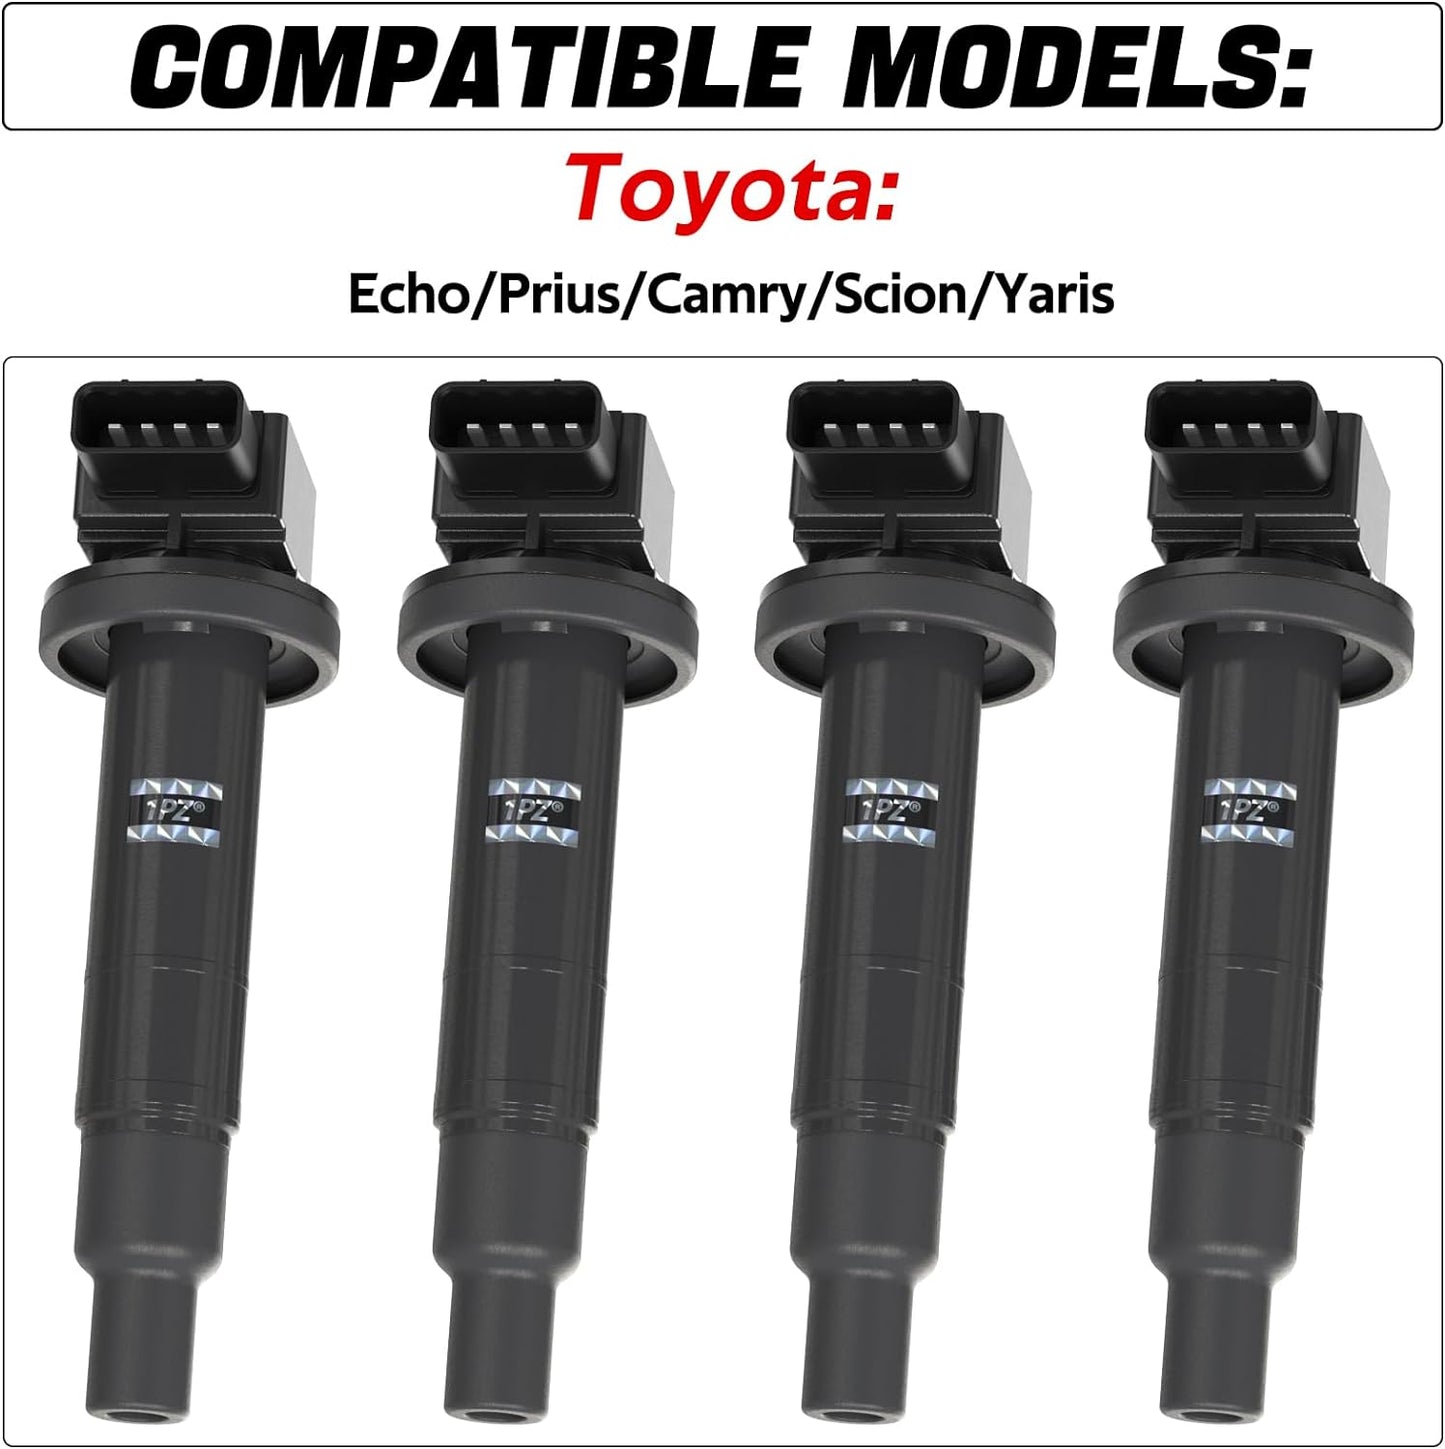 1PZ CZ0-351 set of 4 Ignition Coil Replacement for Toyota Echo Yaris Prius 2000-2019 Scion XA XB 2004 2005 2006 1.3 1.5 L4 UF316 5C1293 C1304